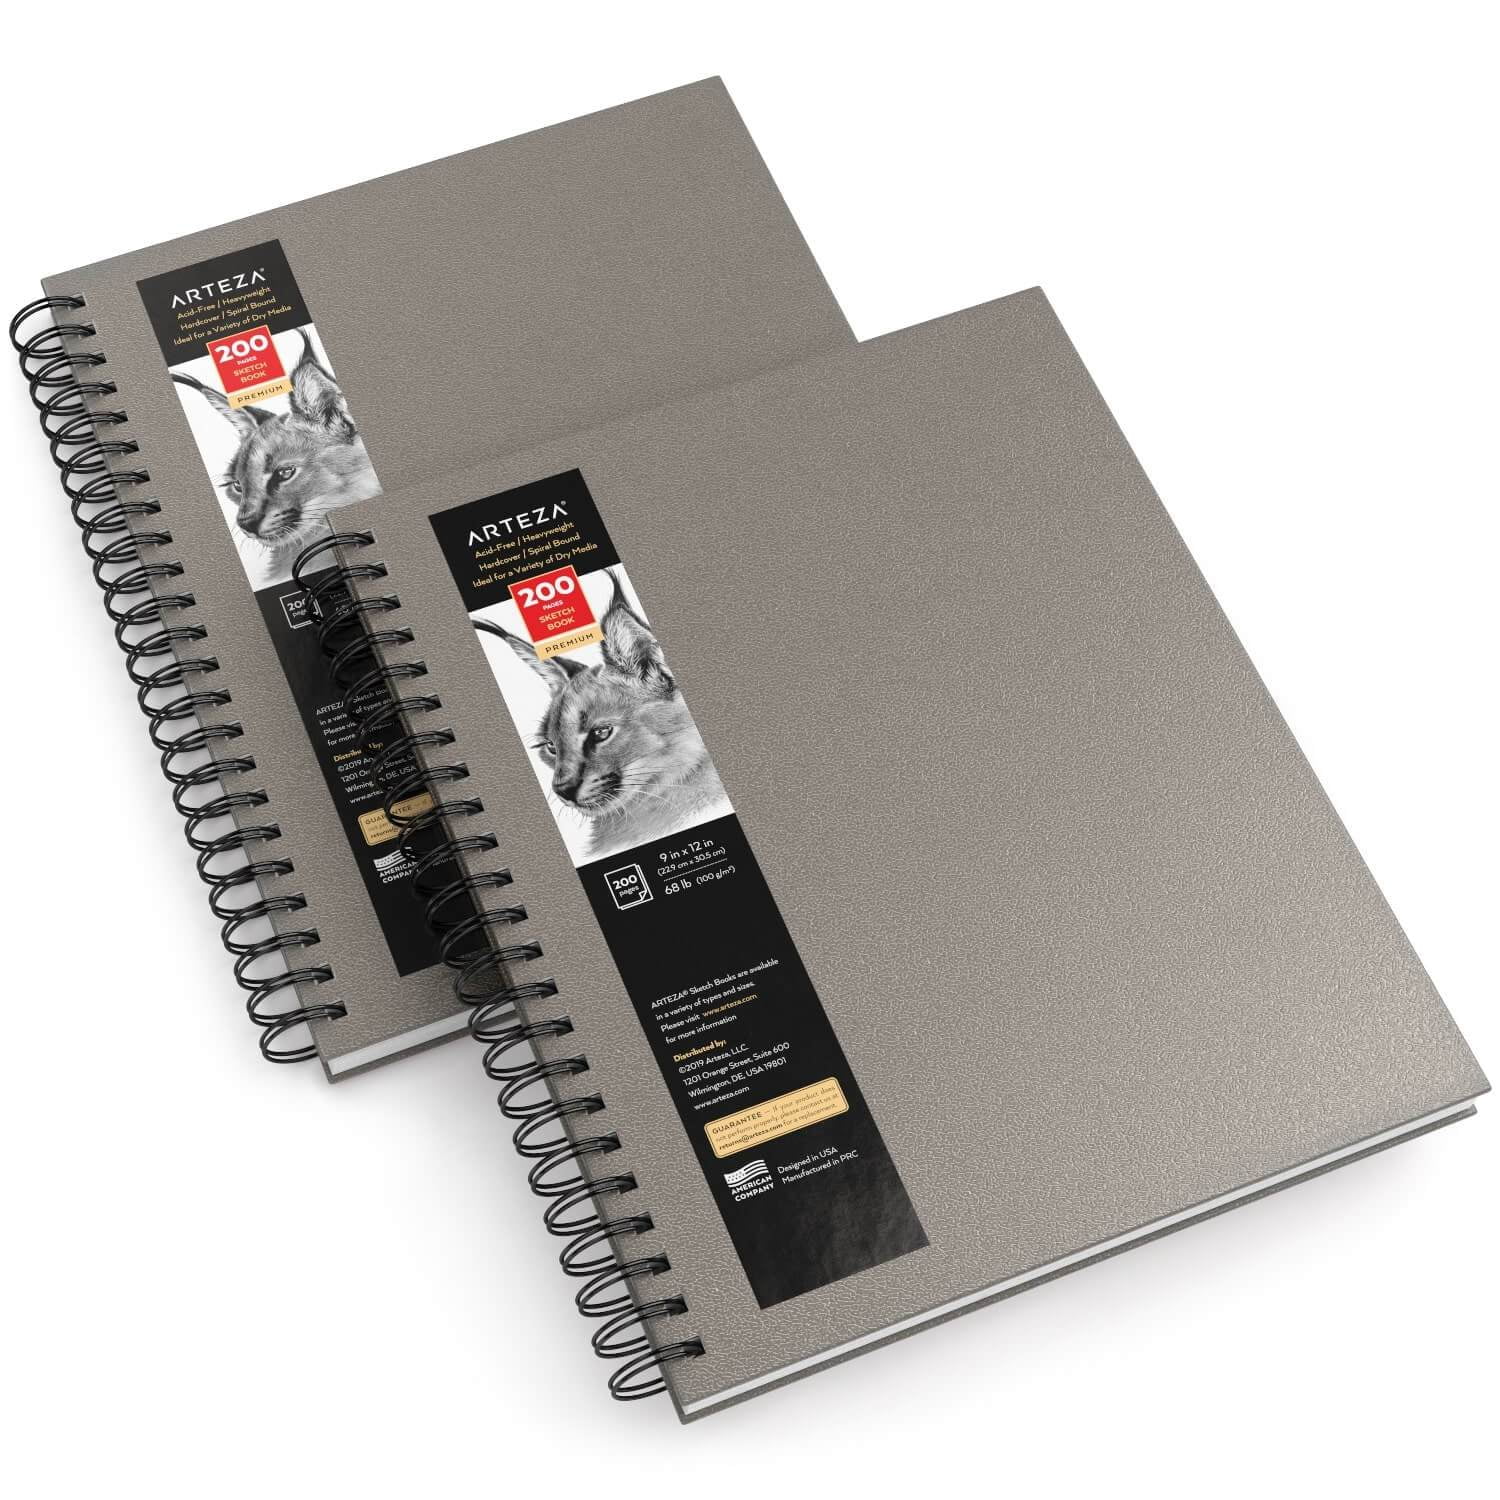 Arteza Sketchbook, Spiral-Bound Hardcover, Gray, 9x12, 200 Pages of  Drawing Paper Each - 2 Pack